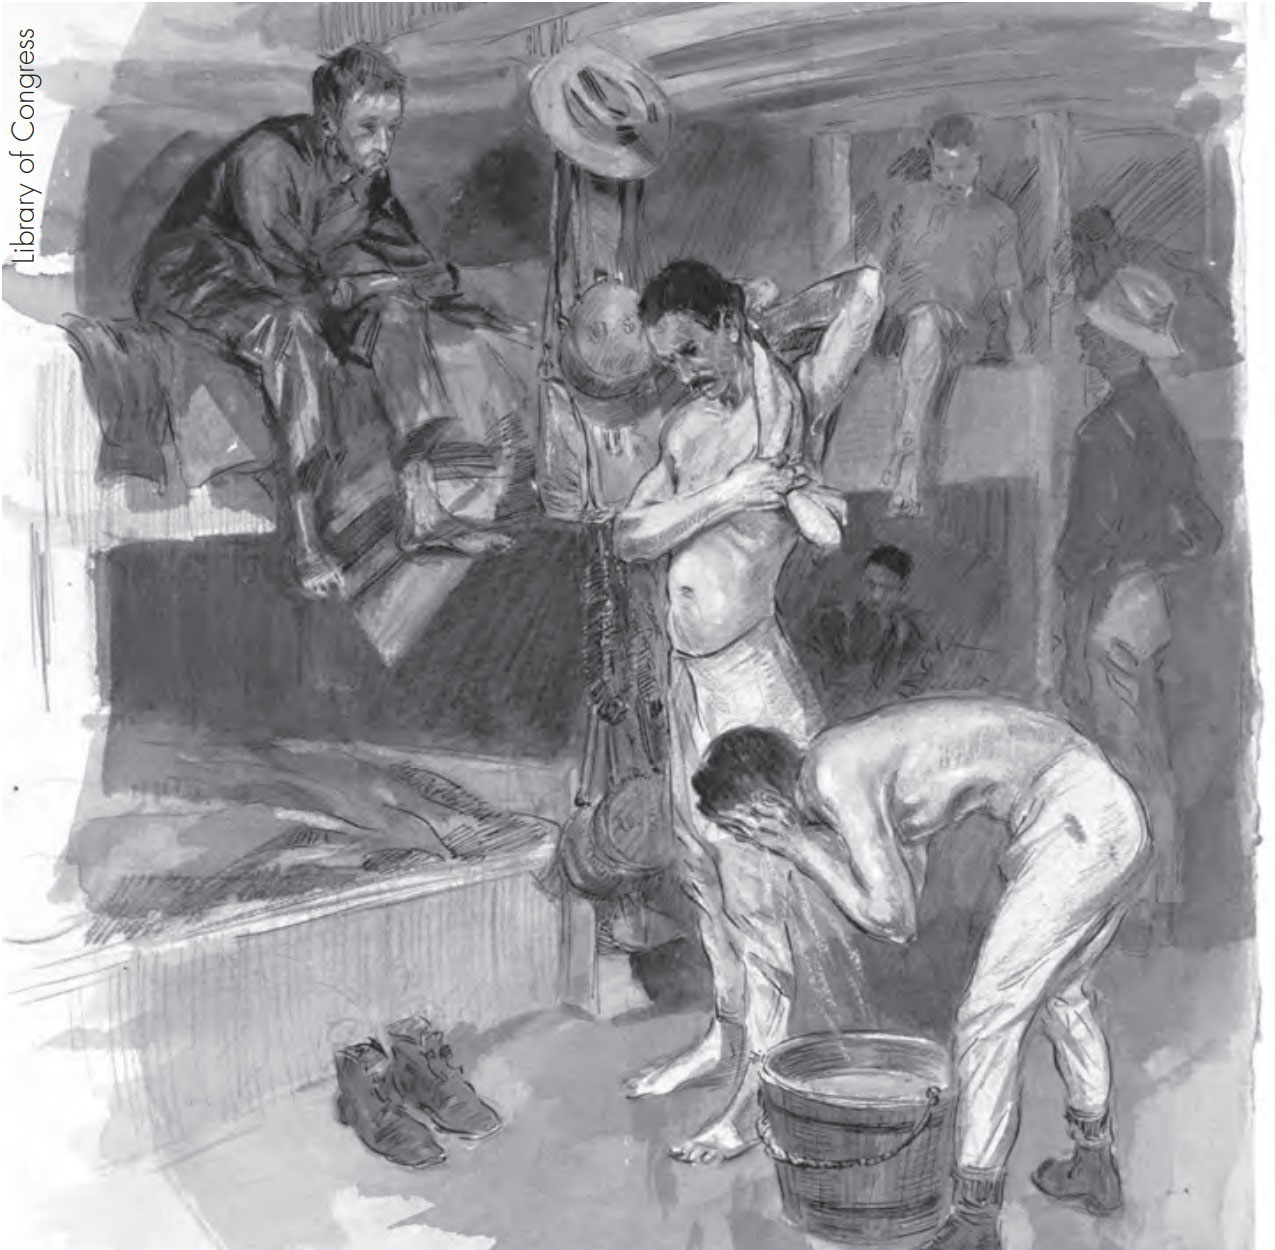 Sketch by William Glackens showing soldiers in their berths and bathing aboard a transport bound for Cuba, c.1898